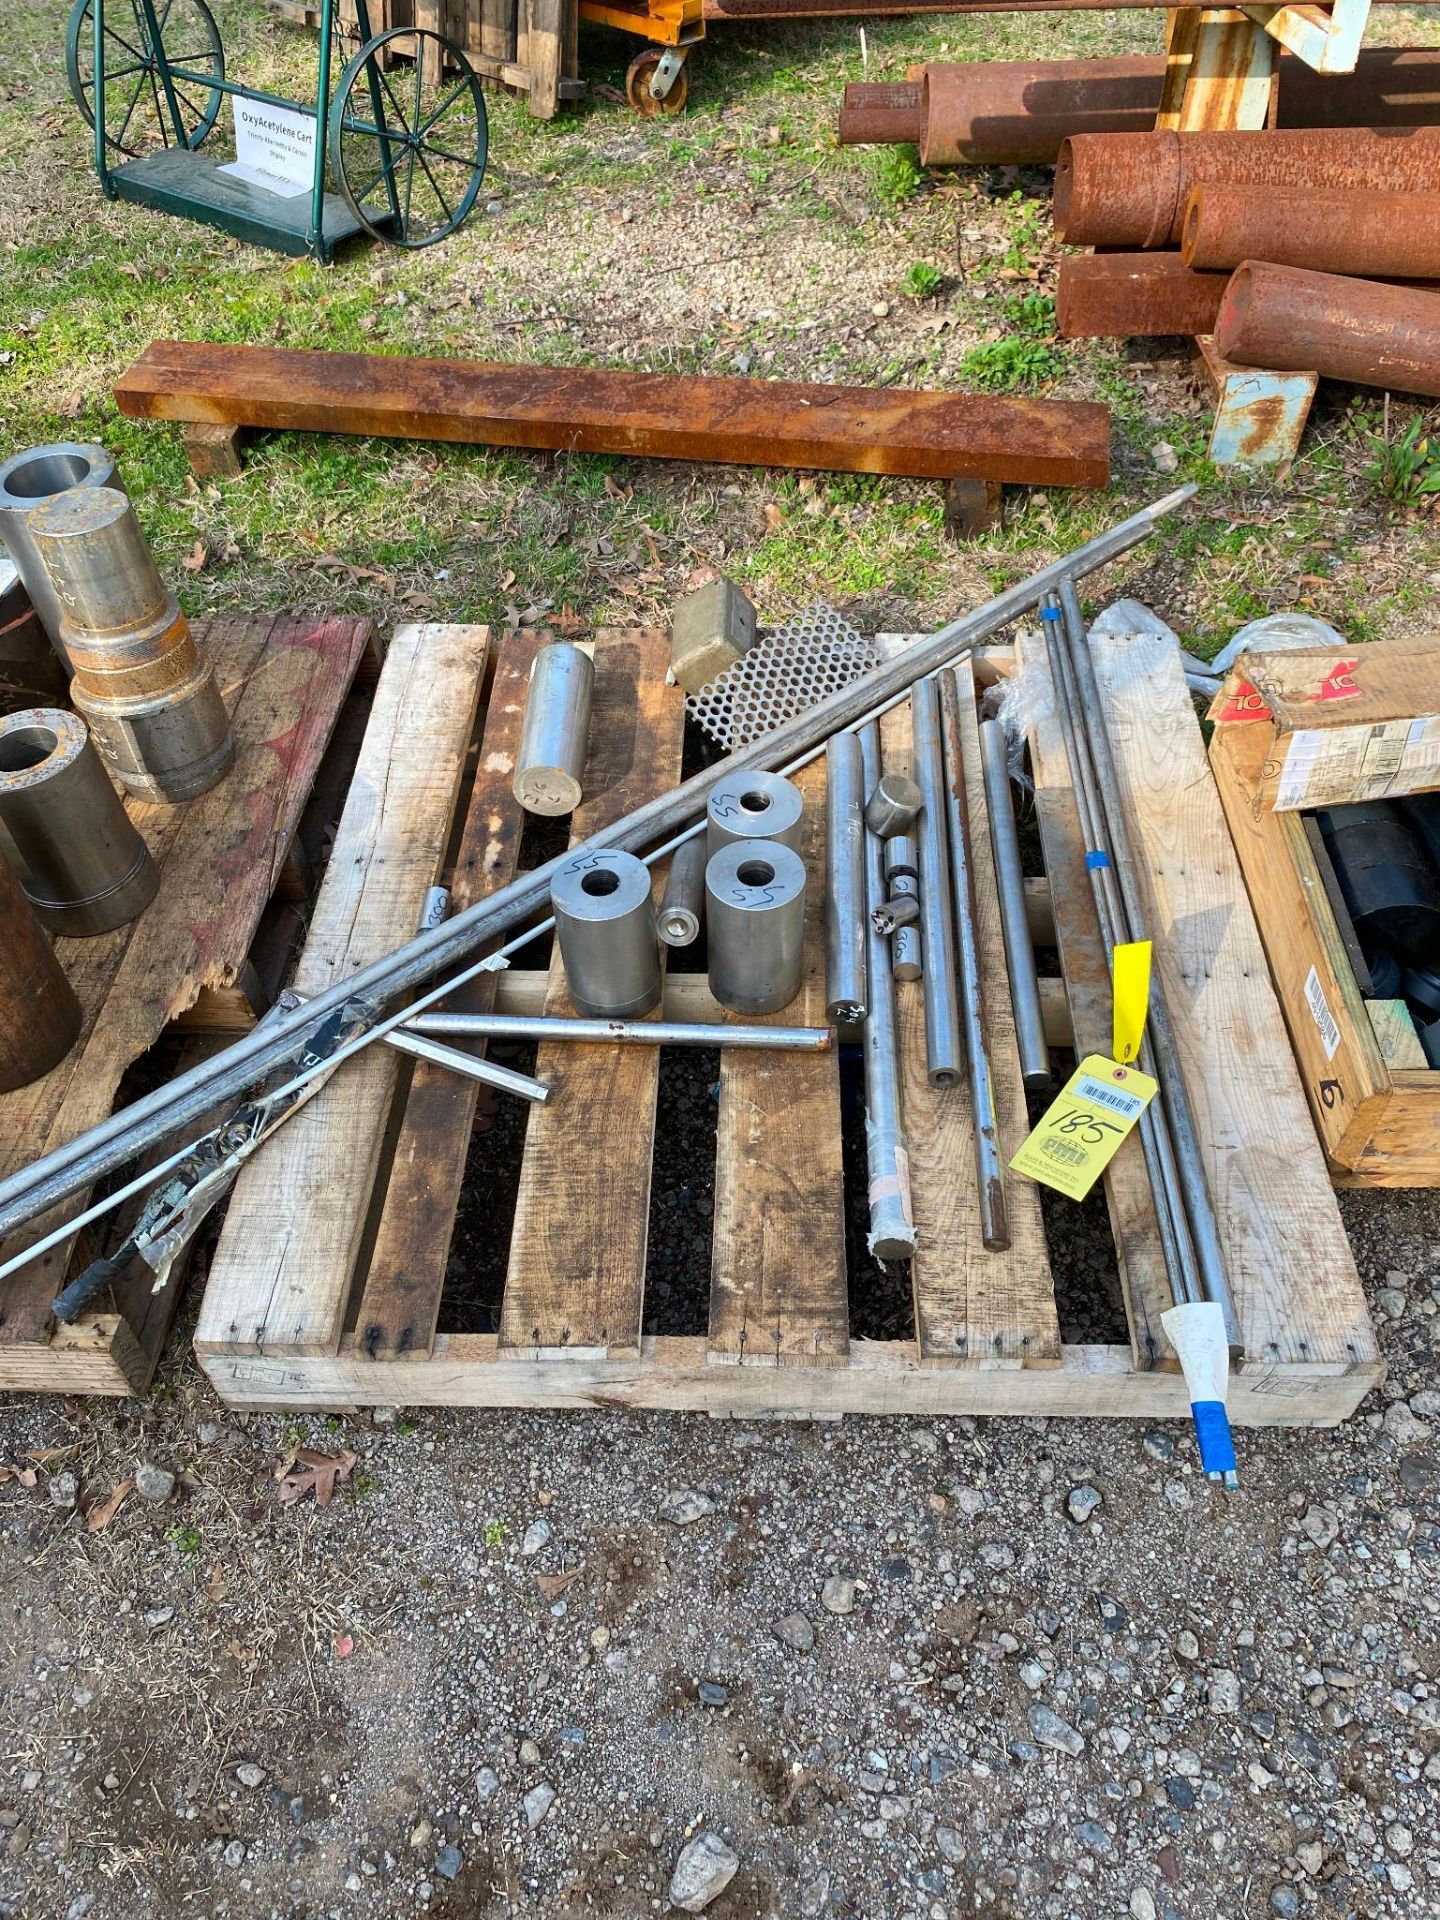 LOT OF STAINLESS STEEL ROUND BAR (Located at: P & M Machine, Private Road 3463, Gladewater, TX 75647